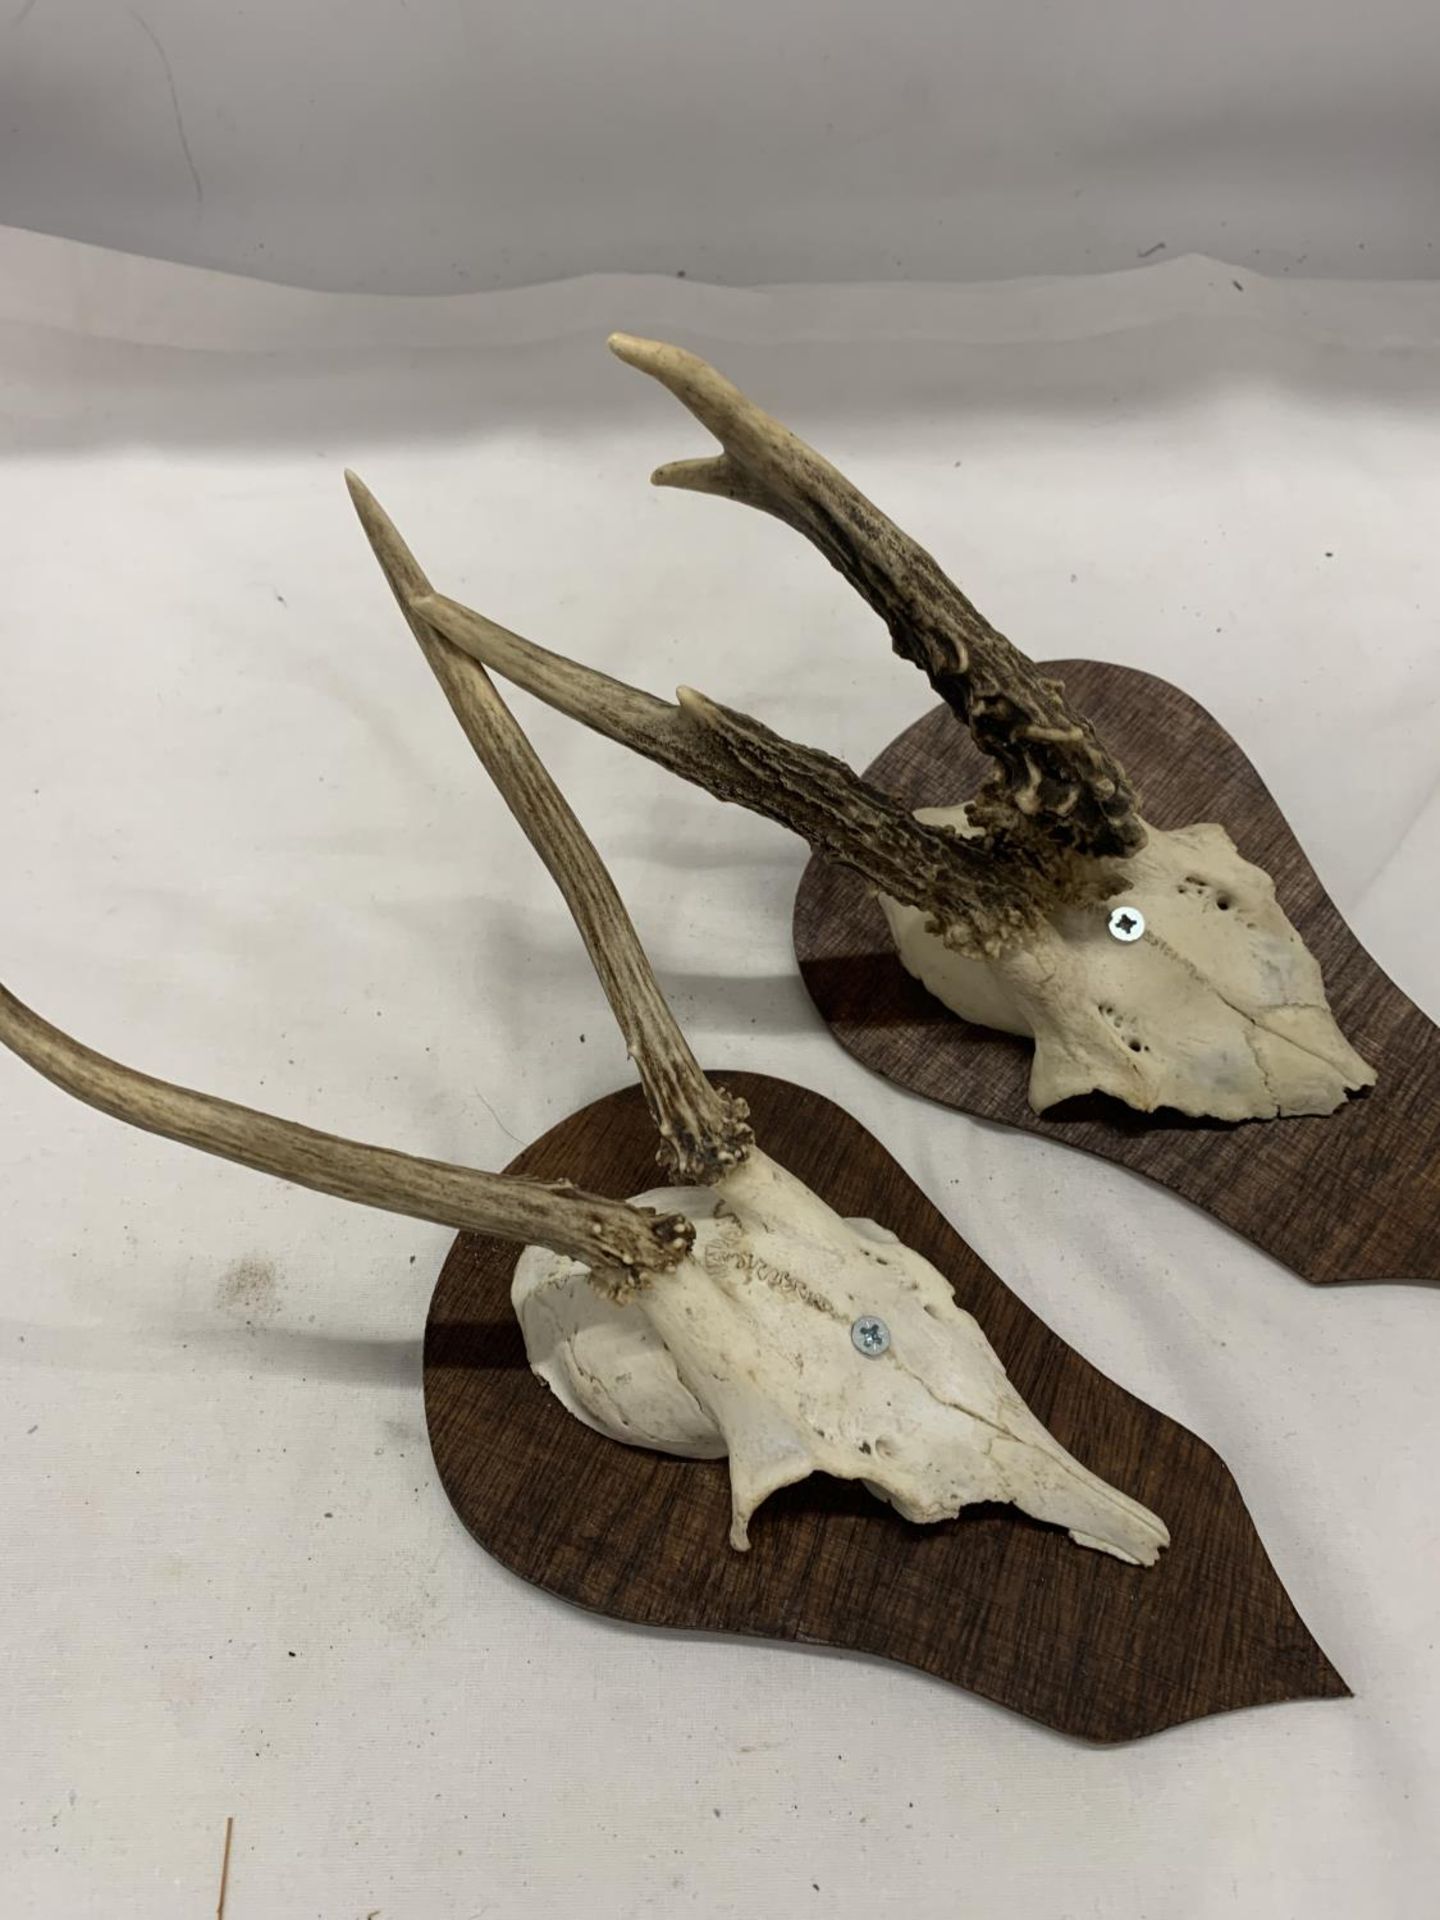 TWO SMALL SKULLS WITH ANTLERS MOUNTED ON SHIELD SHAPED PLINTHS - Image 2 of 2